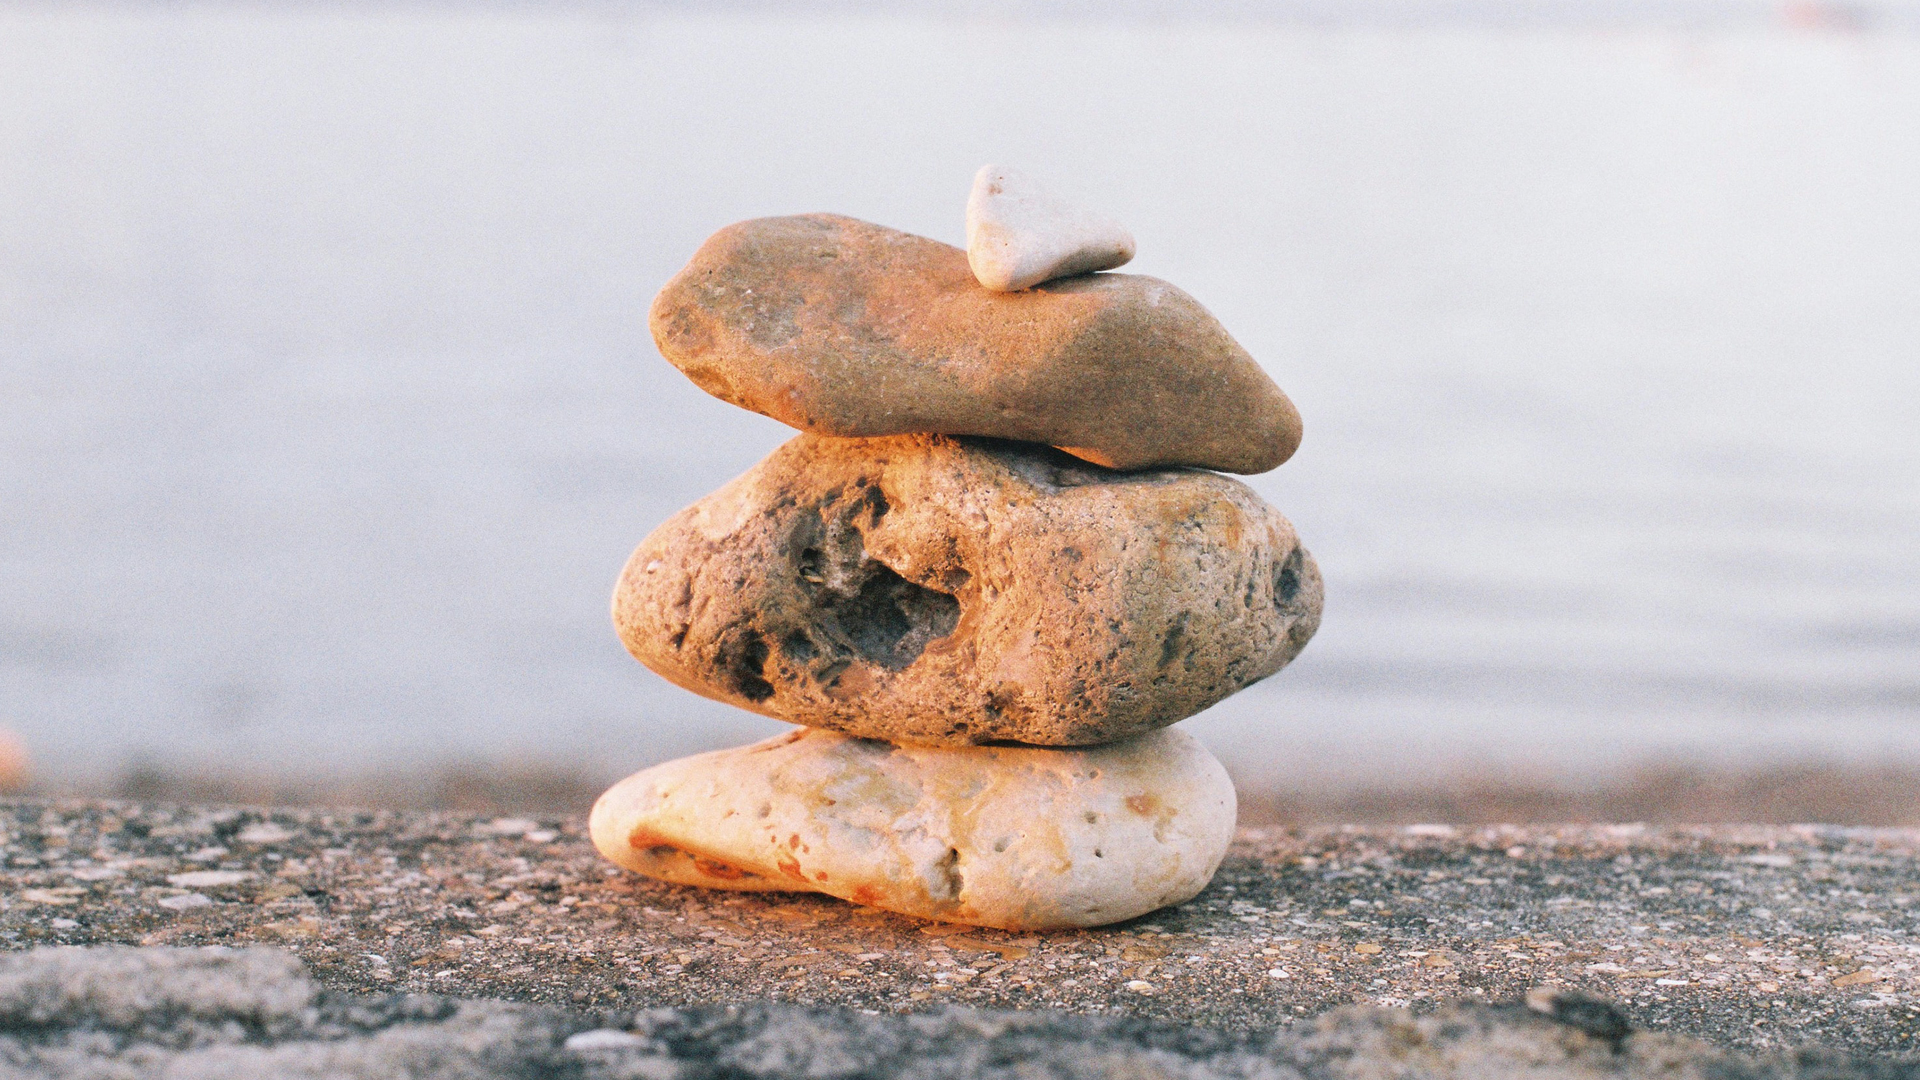 Pebbles balanced on top of one another